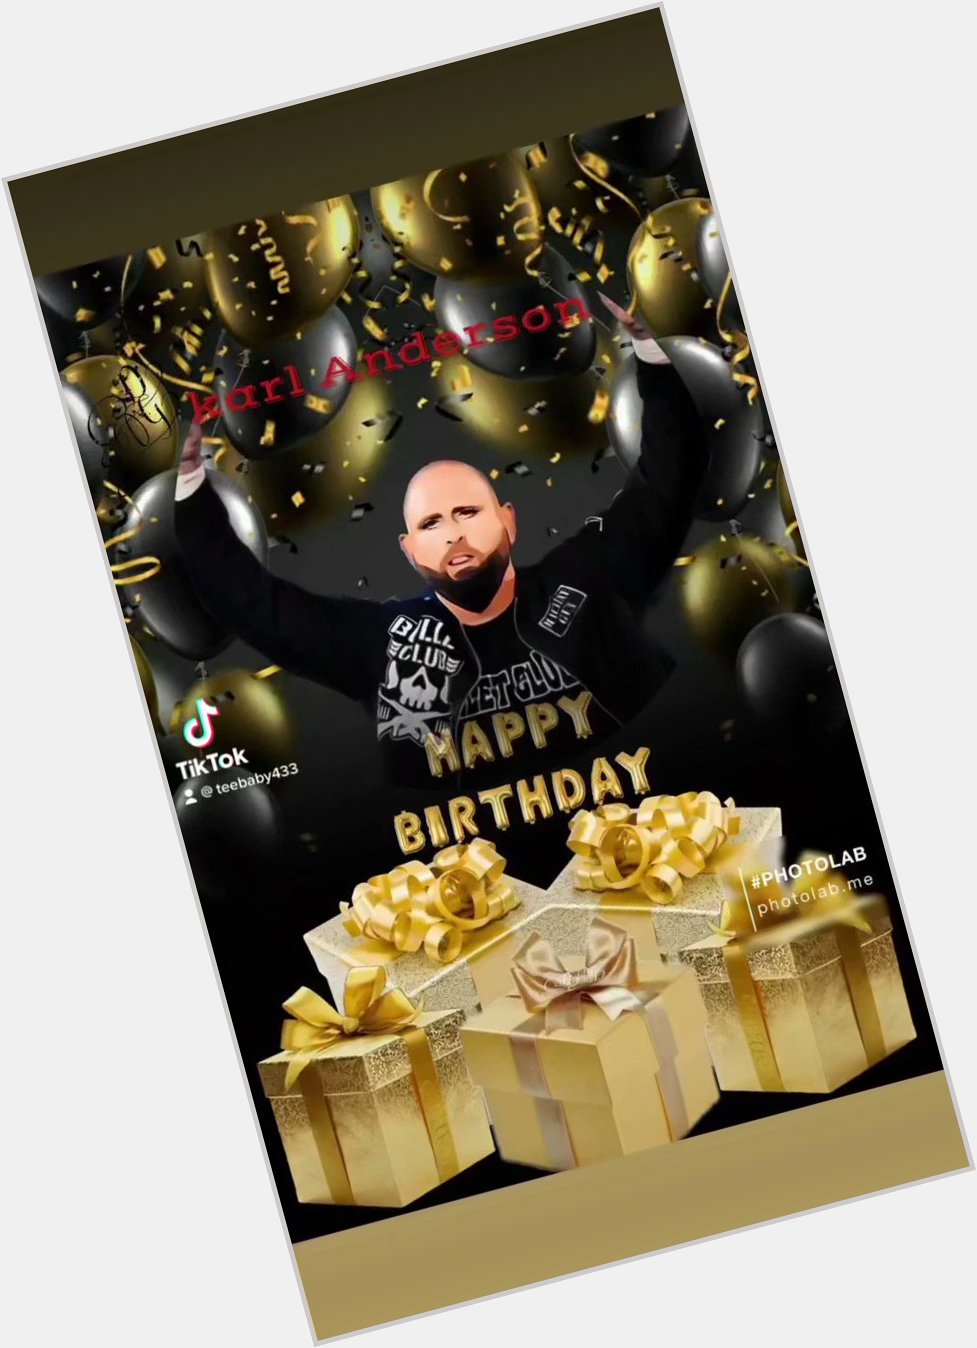 Happy birthday sir Karl Anderson I m sure the OC will celebrate right  enjoy stay safe love you guys 